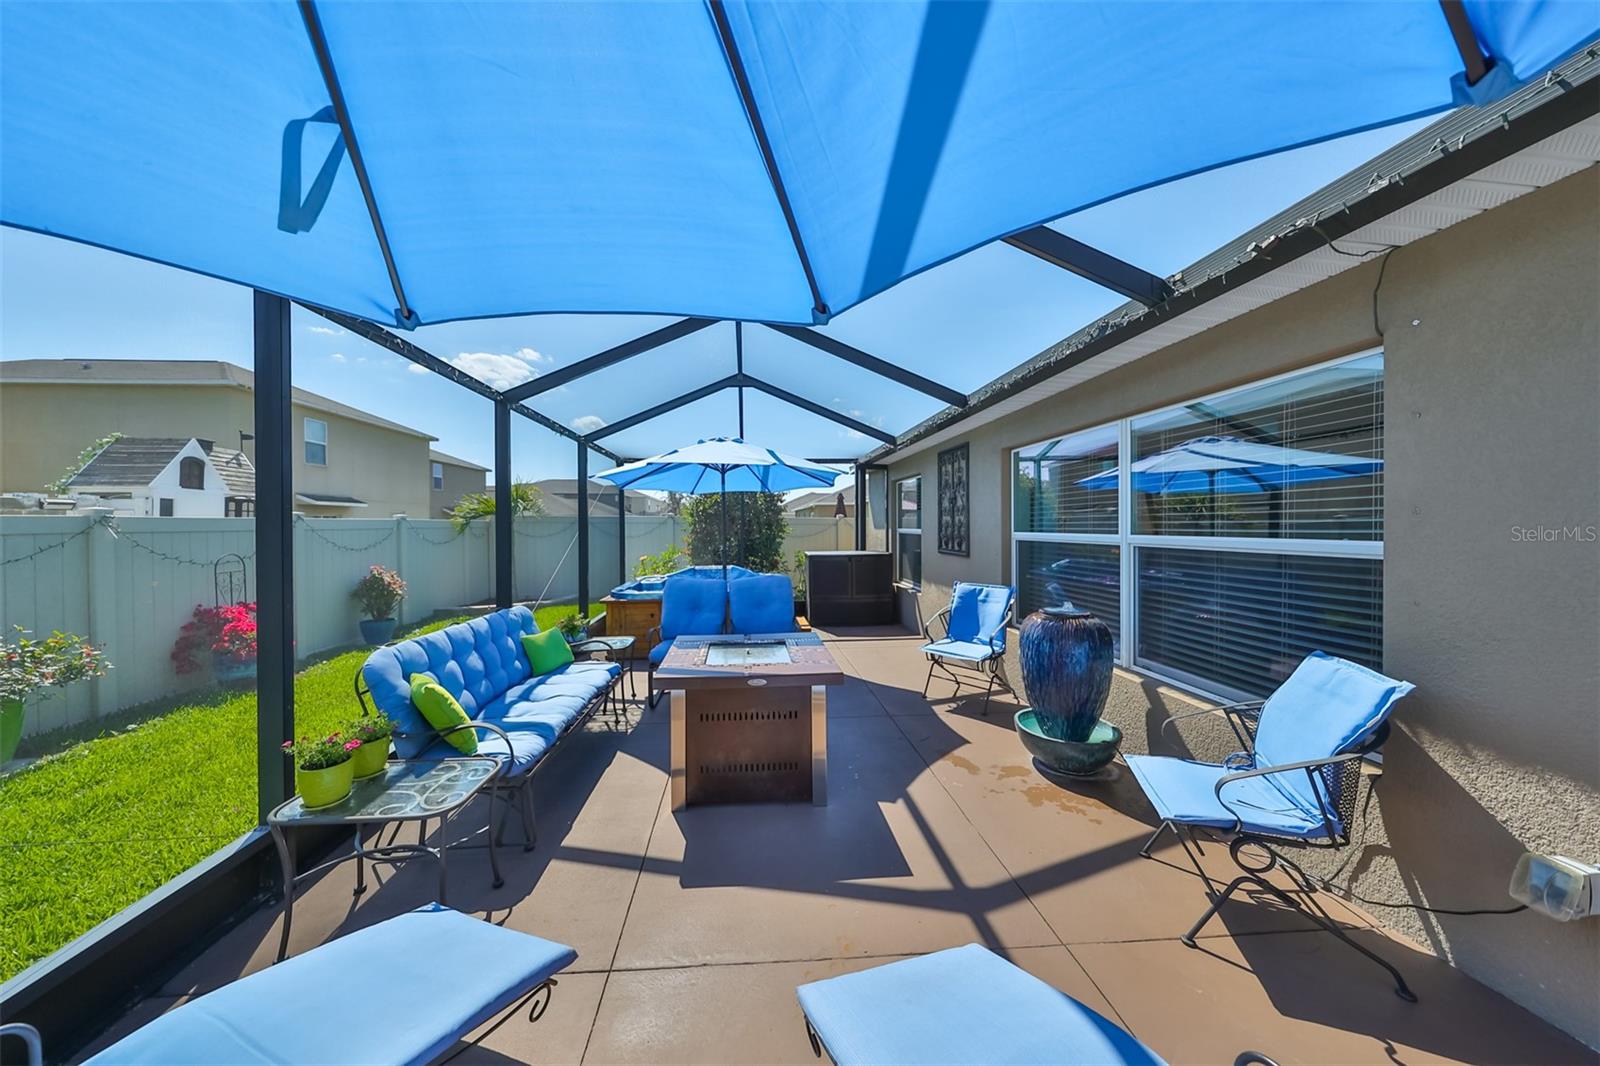 Space for entertaining or family events.  Beautifully scored lanai flooring and a lush backyard to enjoy.